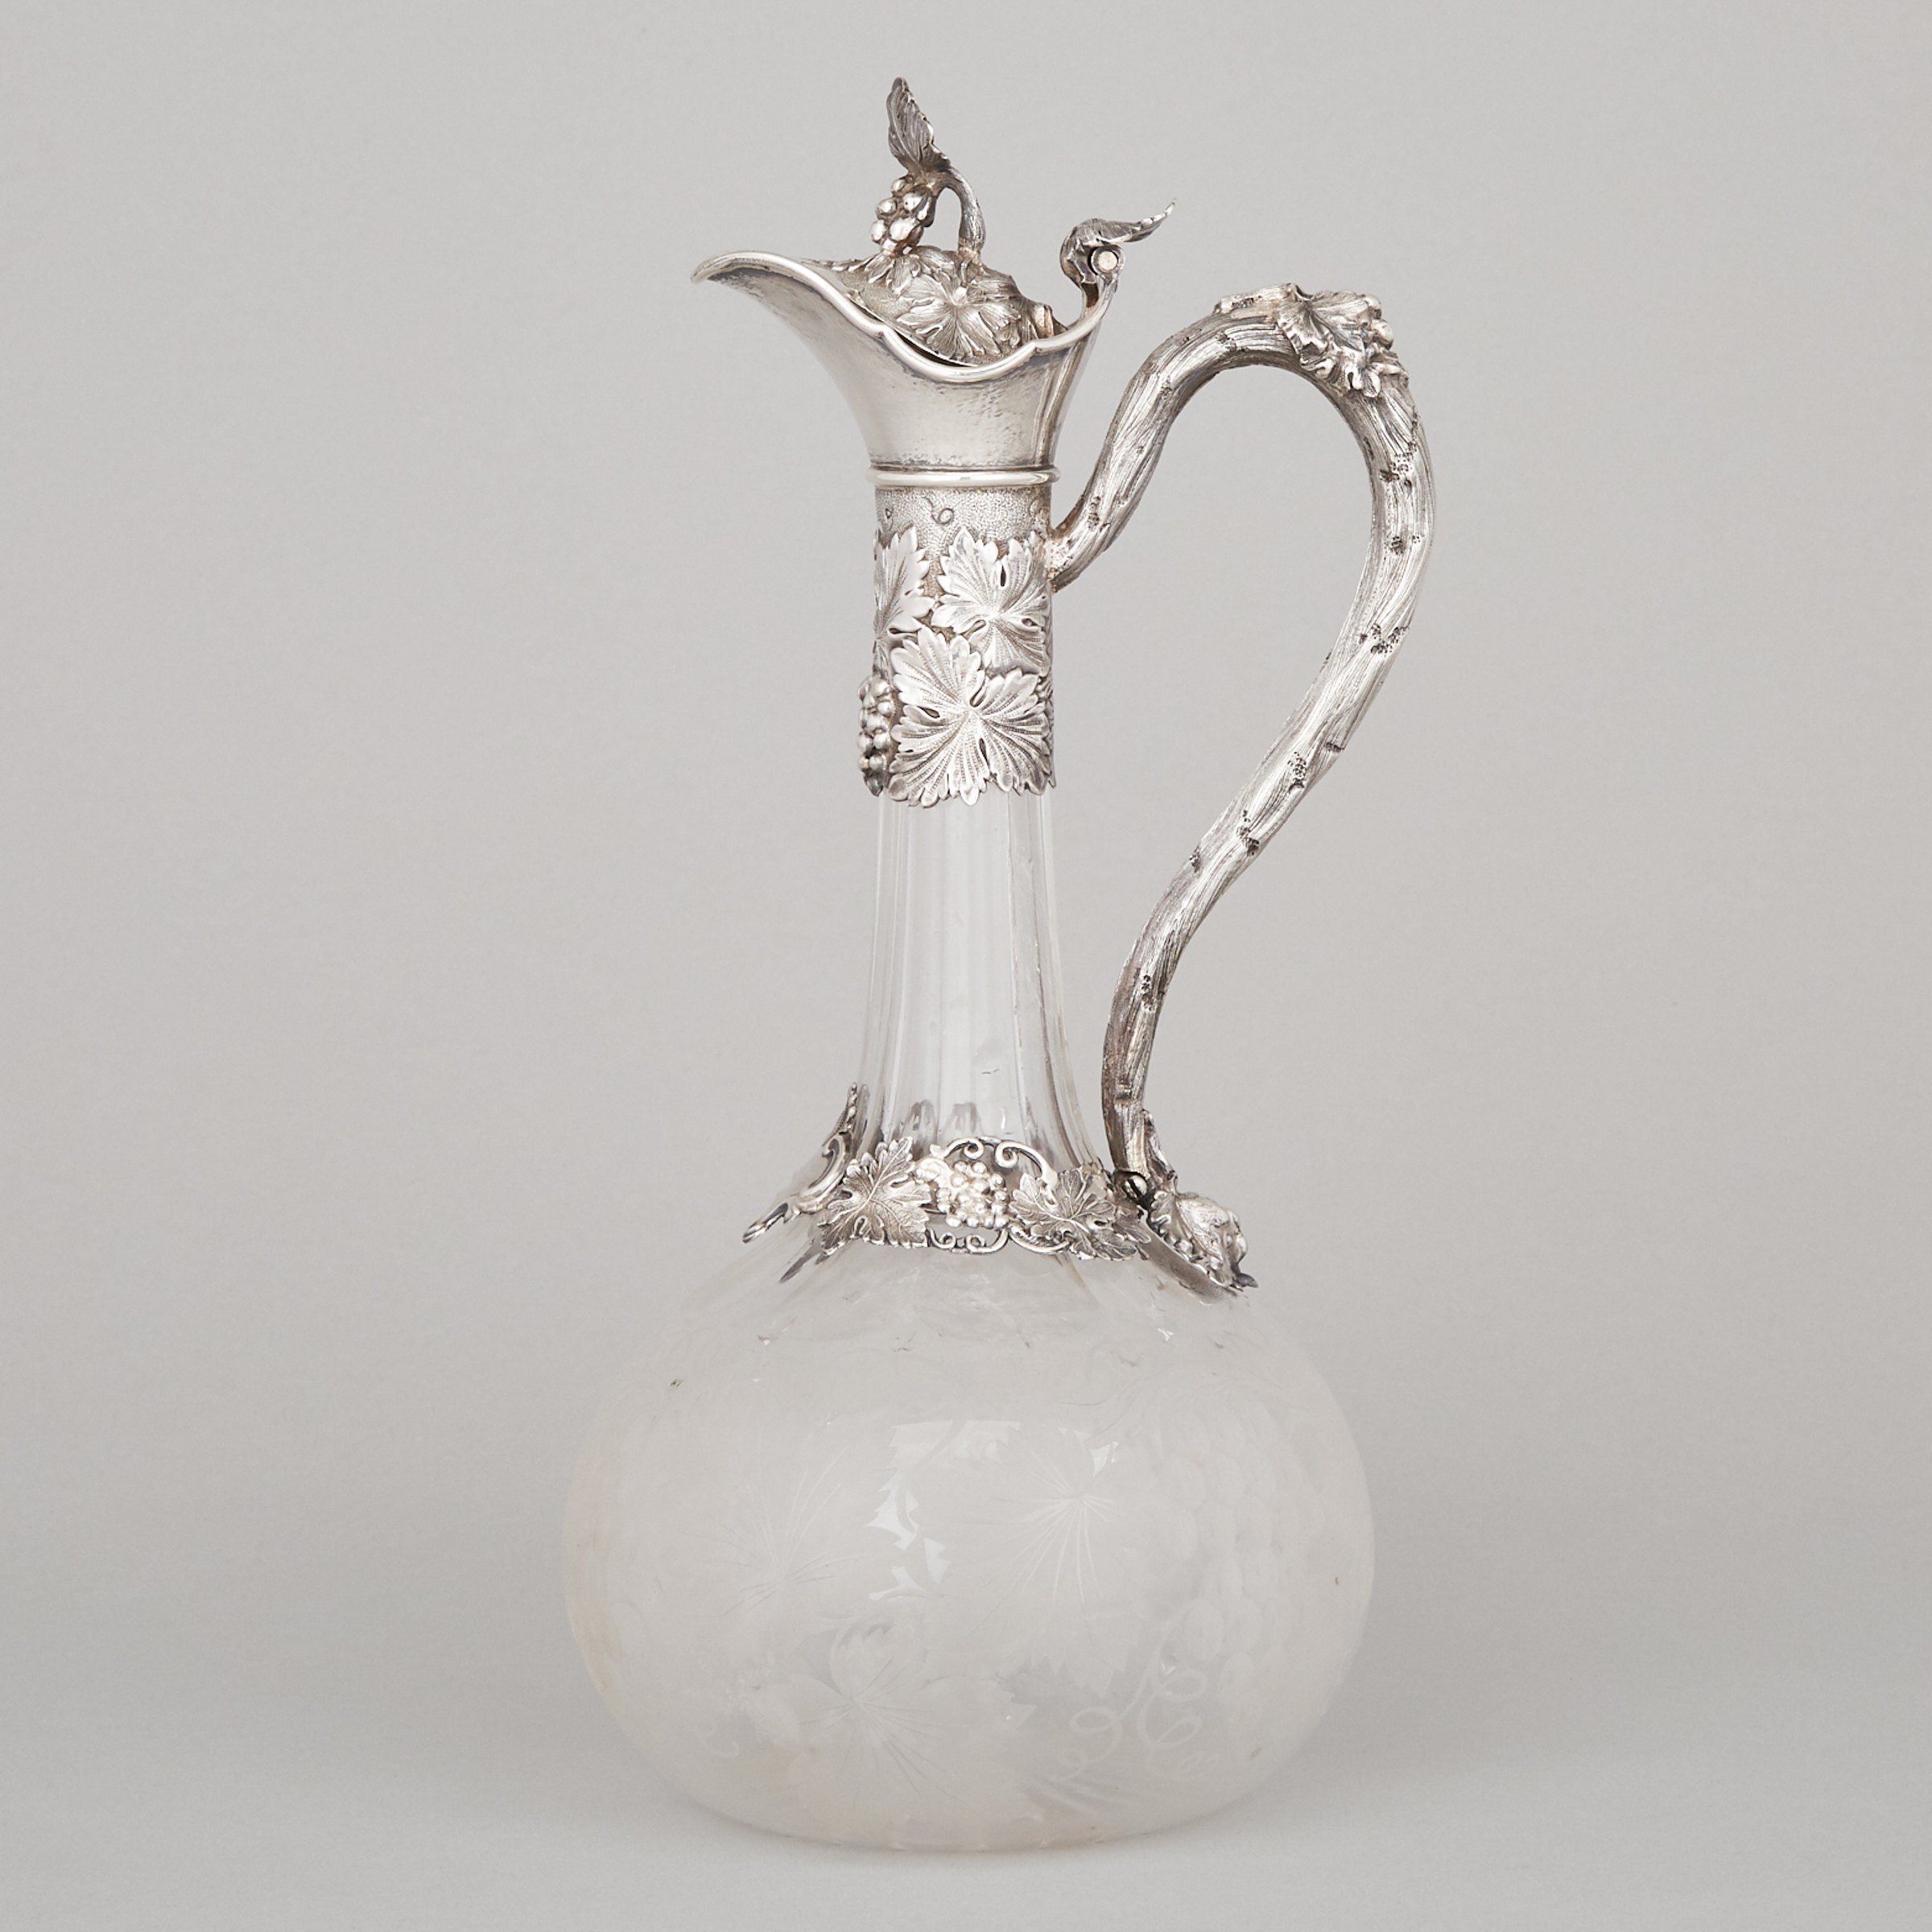 Victorian Silver Mounted Cut and Engraved Glass Claret Jug, George Richards & Edward Brown, London, 1862